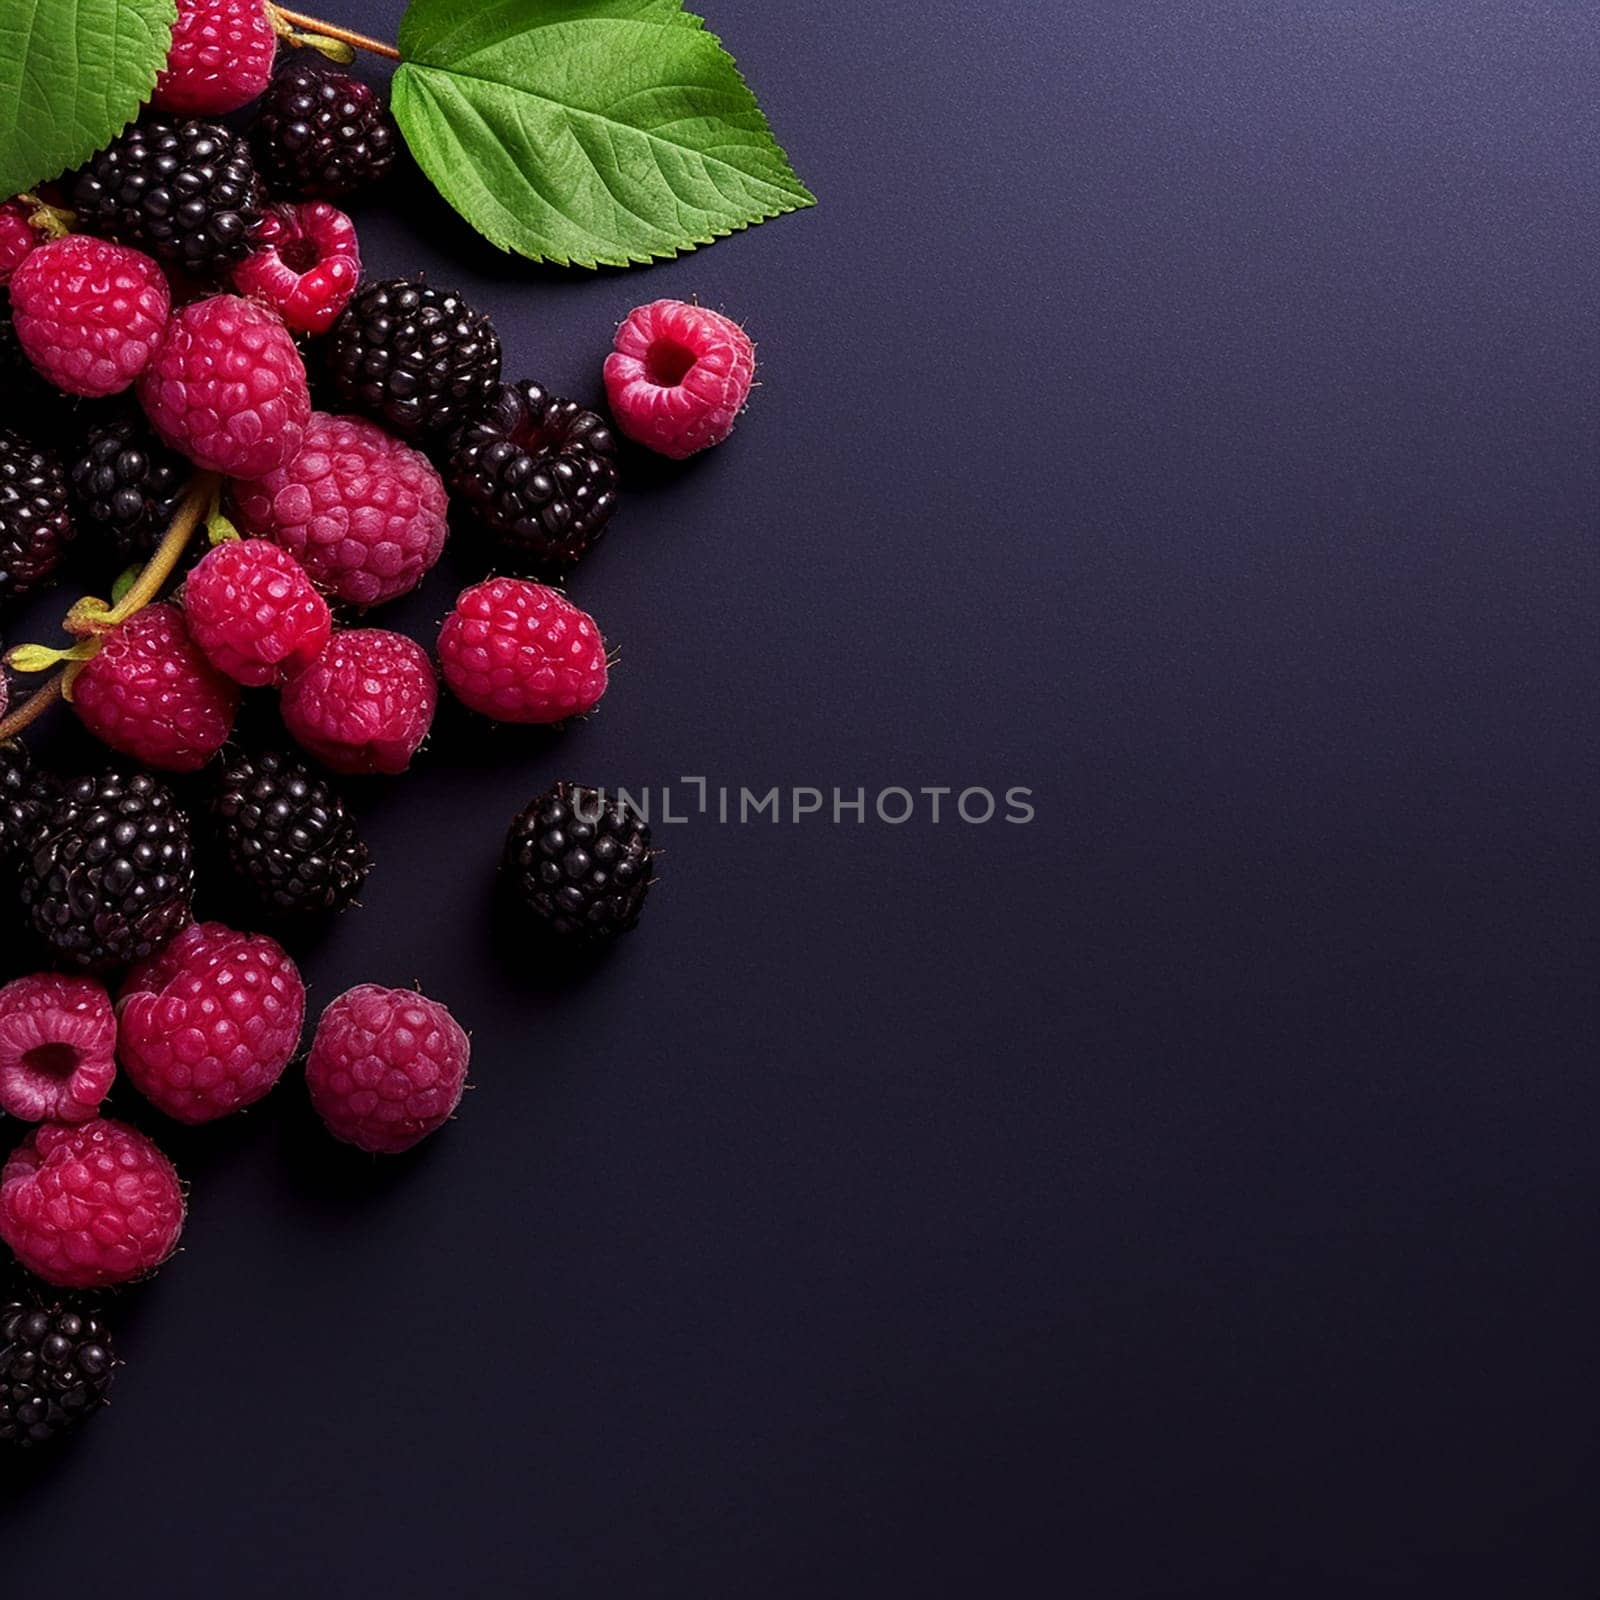 Ripe blackberries and raspberries on a branch with green leaves against a dark background. by Hype2art